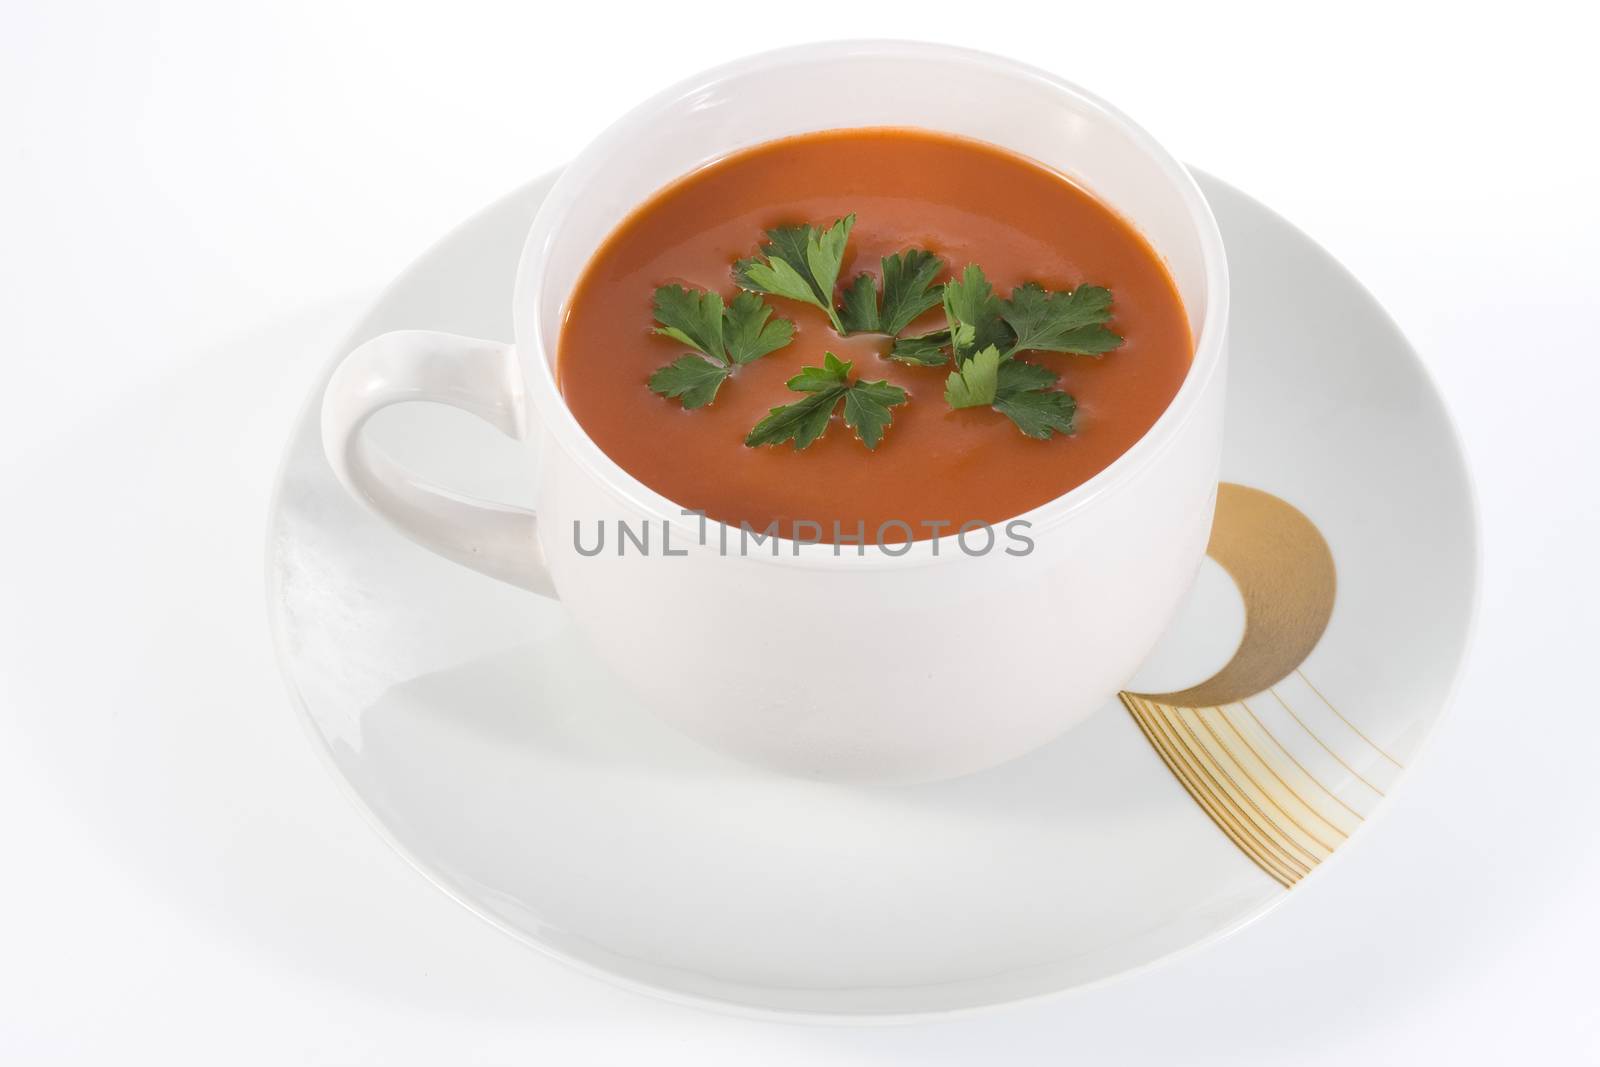 Tomatoe soup in a bowl by orcearo